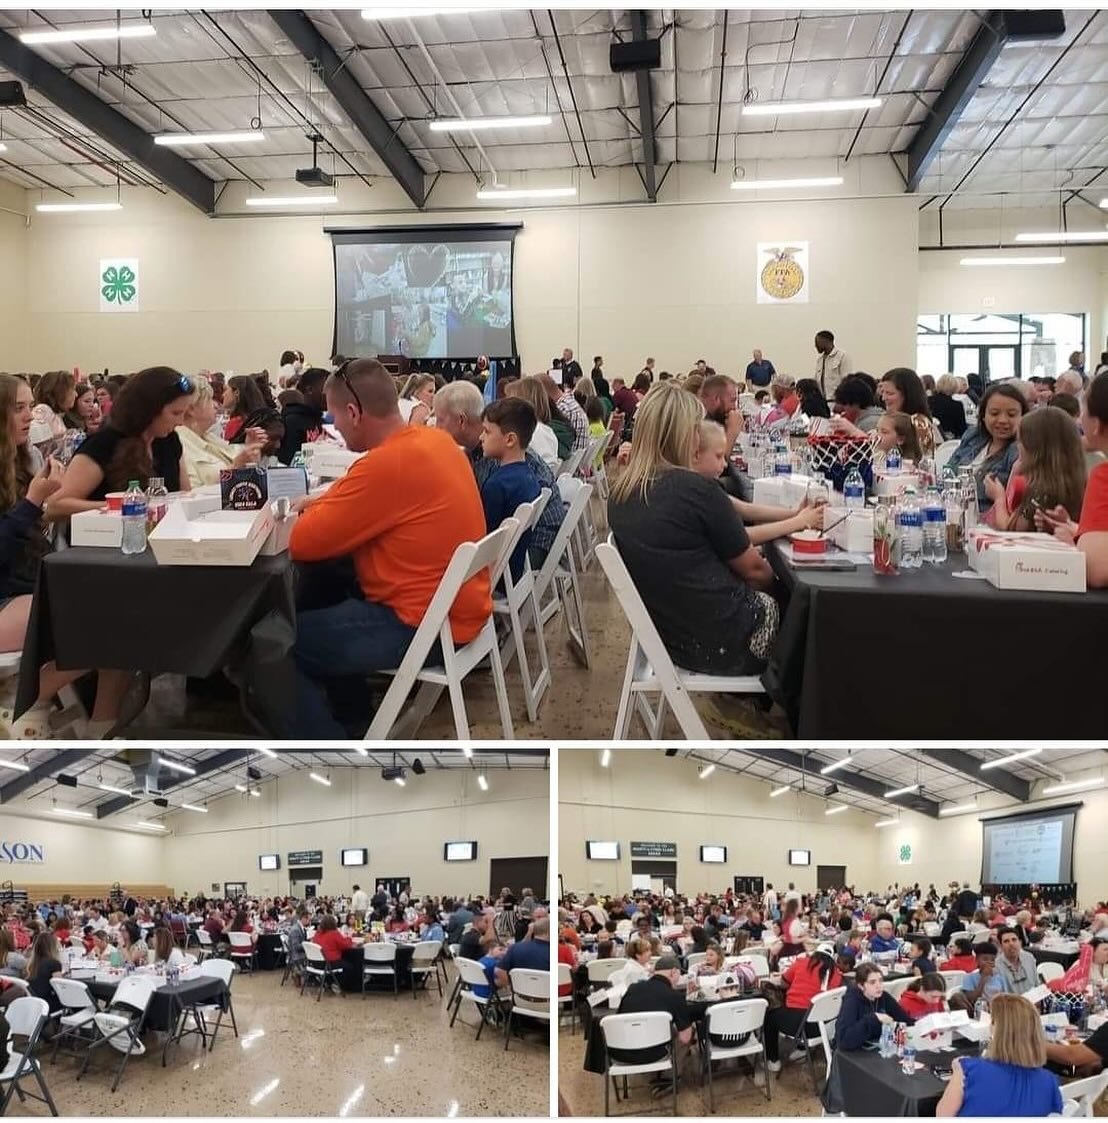 How have 19 years gone by since our first humble mentor luncheon with a homemade baked potato bar &amp; 30 sweet mentors? This year we top 300 mentors and 600 attending the Gala.  Thank you COMMUNITY! We love you! #lindsayslegacy #legacyyouthmentorin